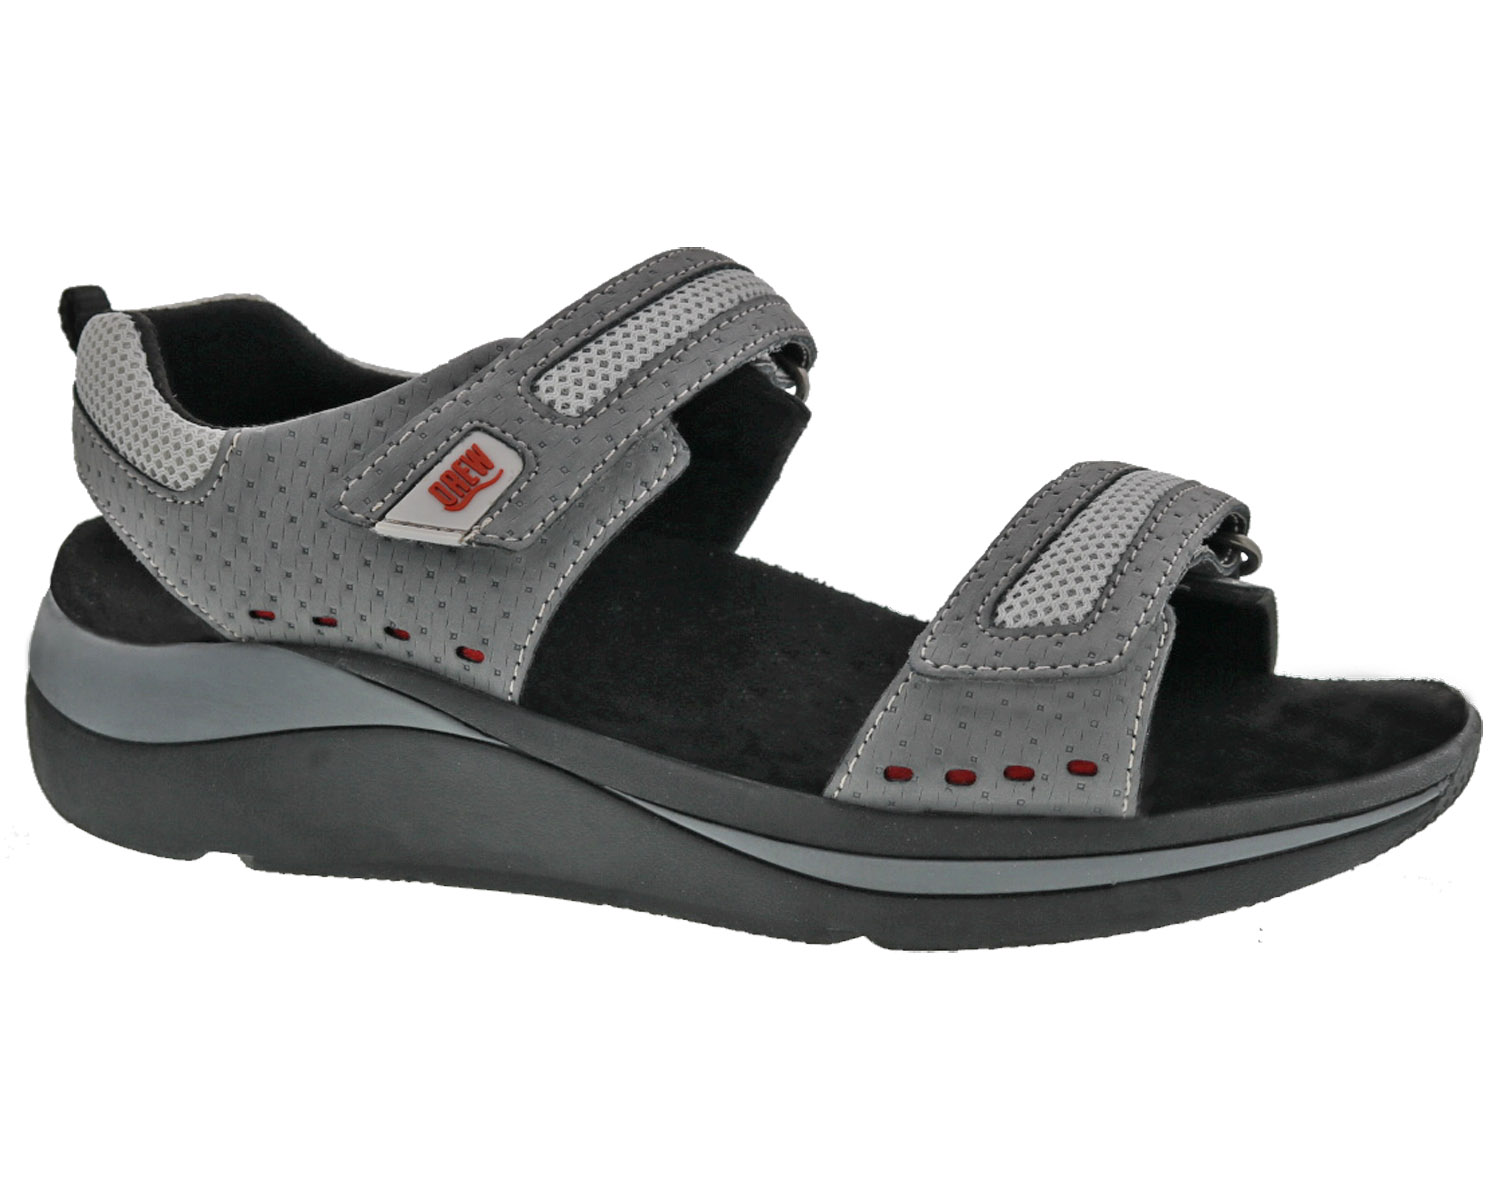 Drew Shoes Sophie 17207 - Women's Sandal - Casual Comfort Therapeutic Sandal - Removable Footbeds - Wide